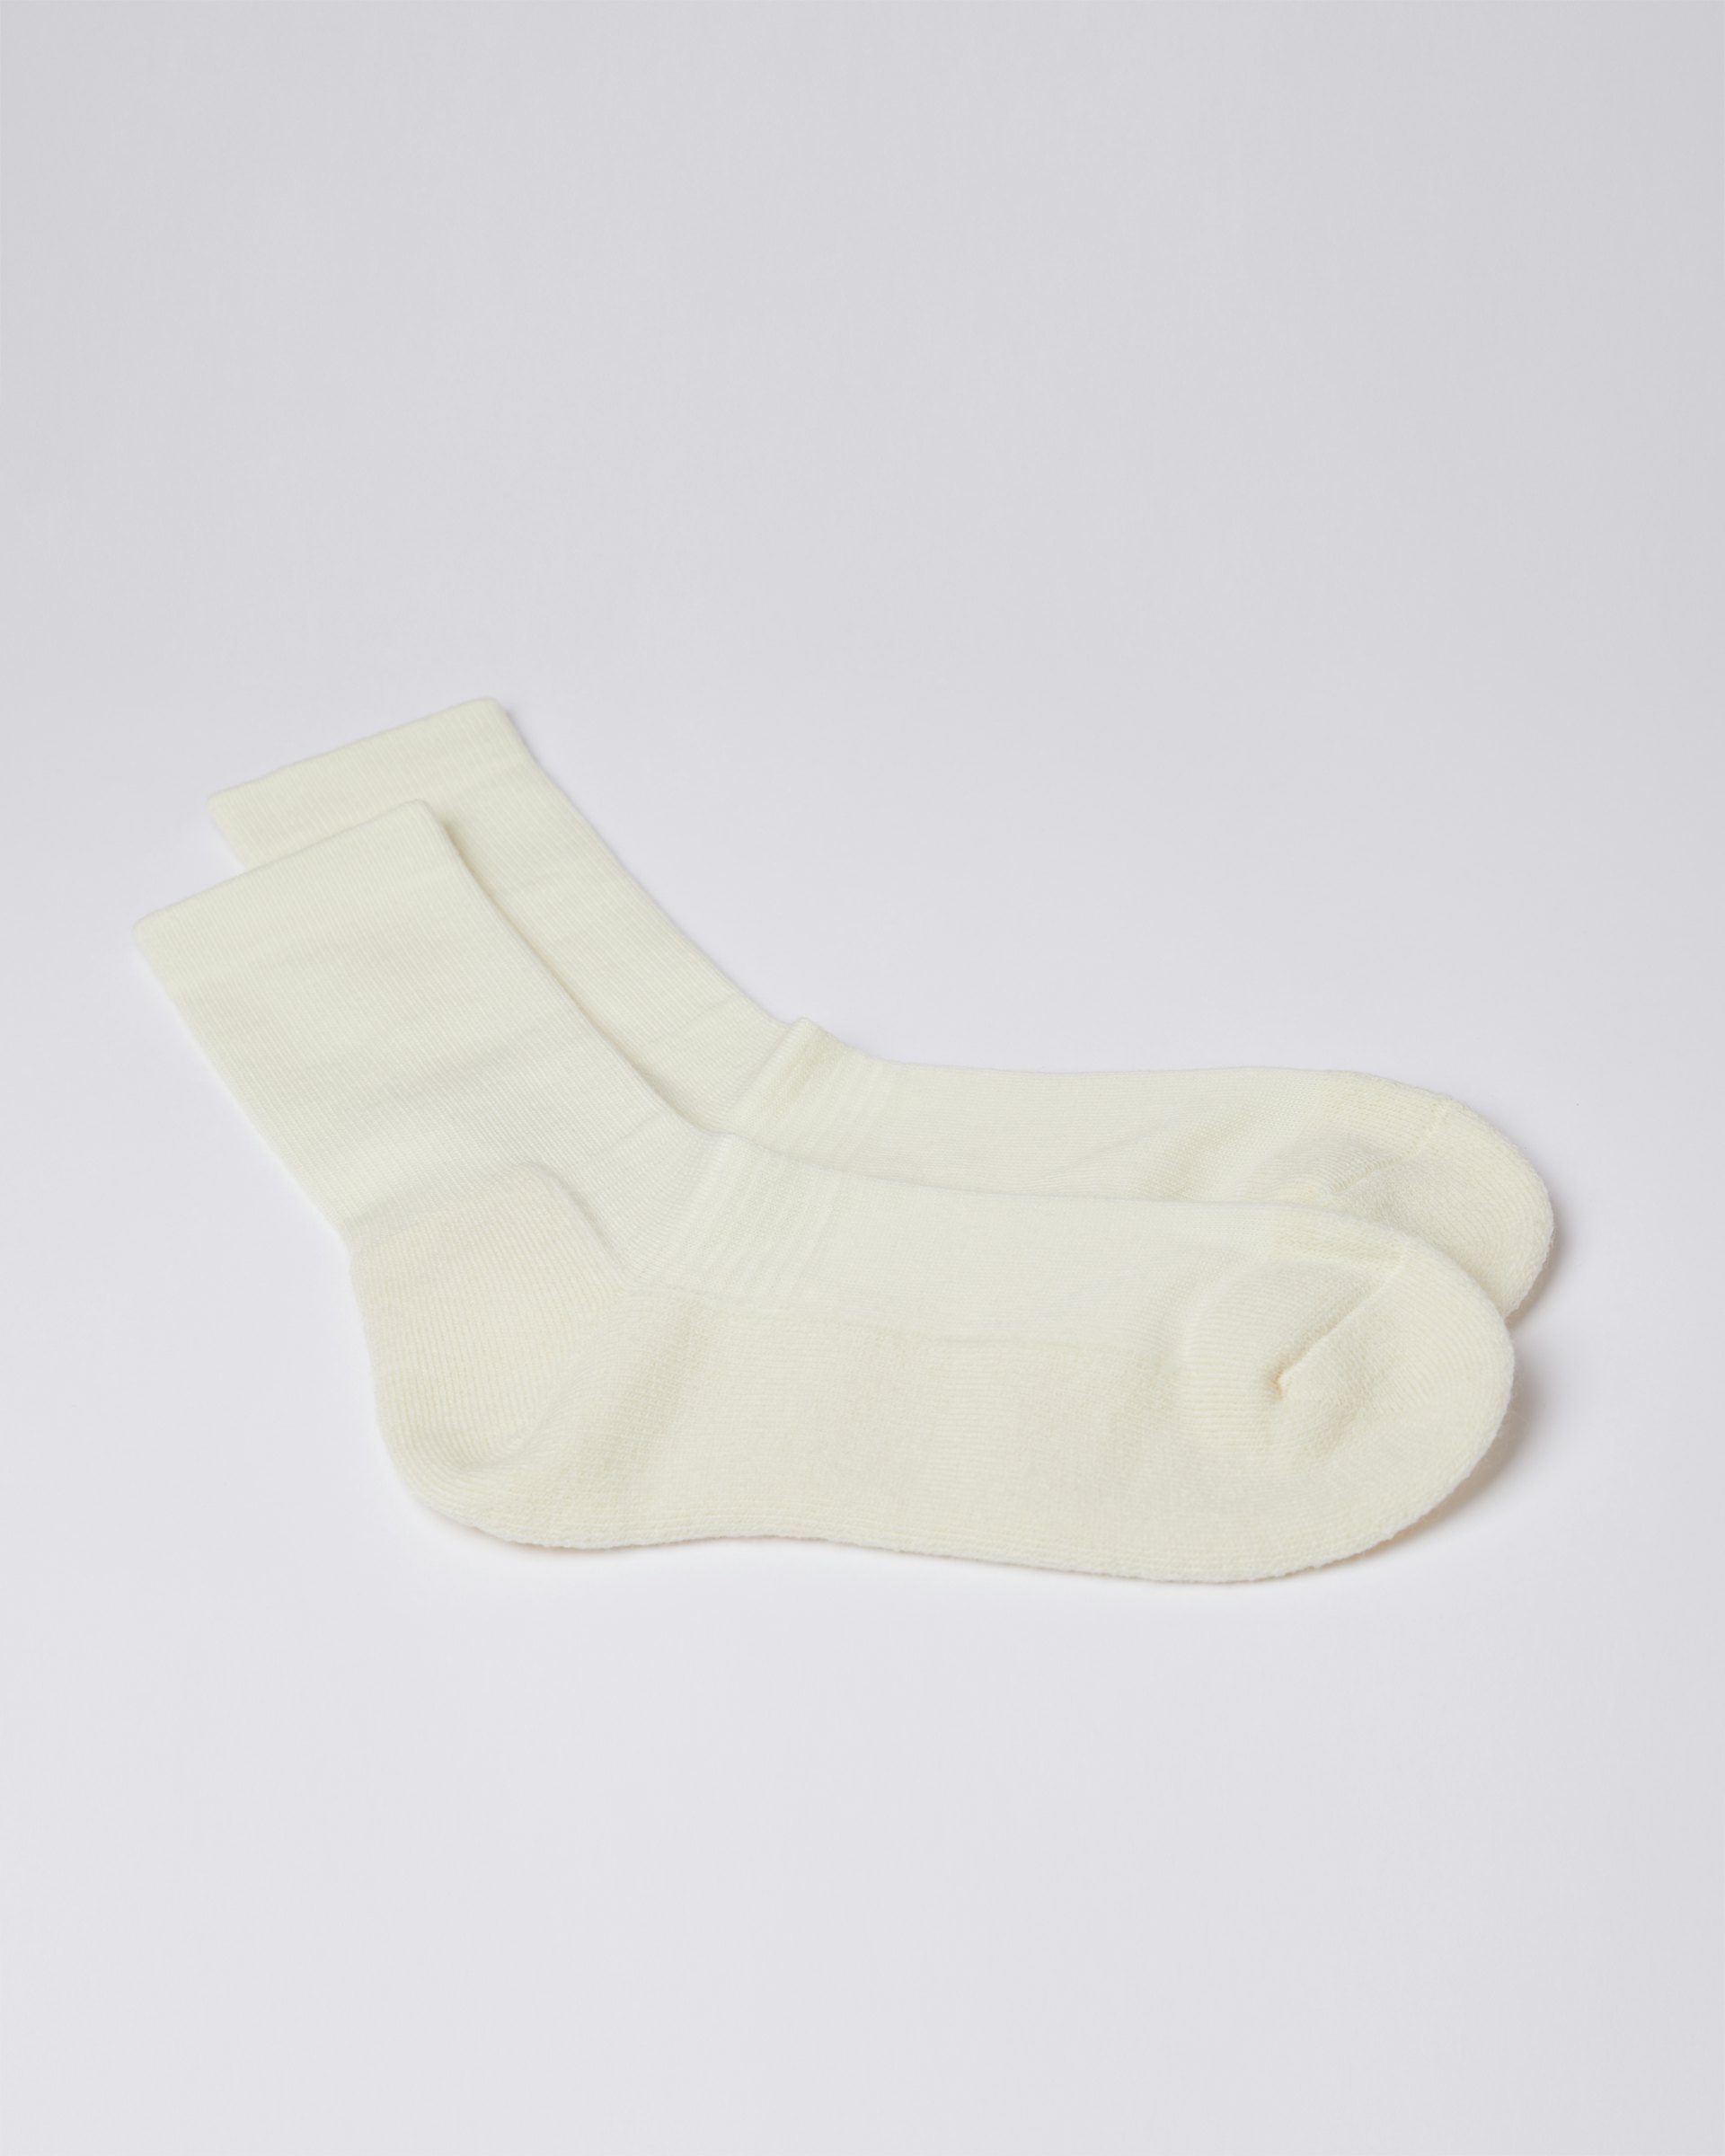 Wool sock is in color off white (3 of 3)